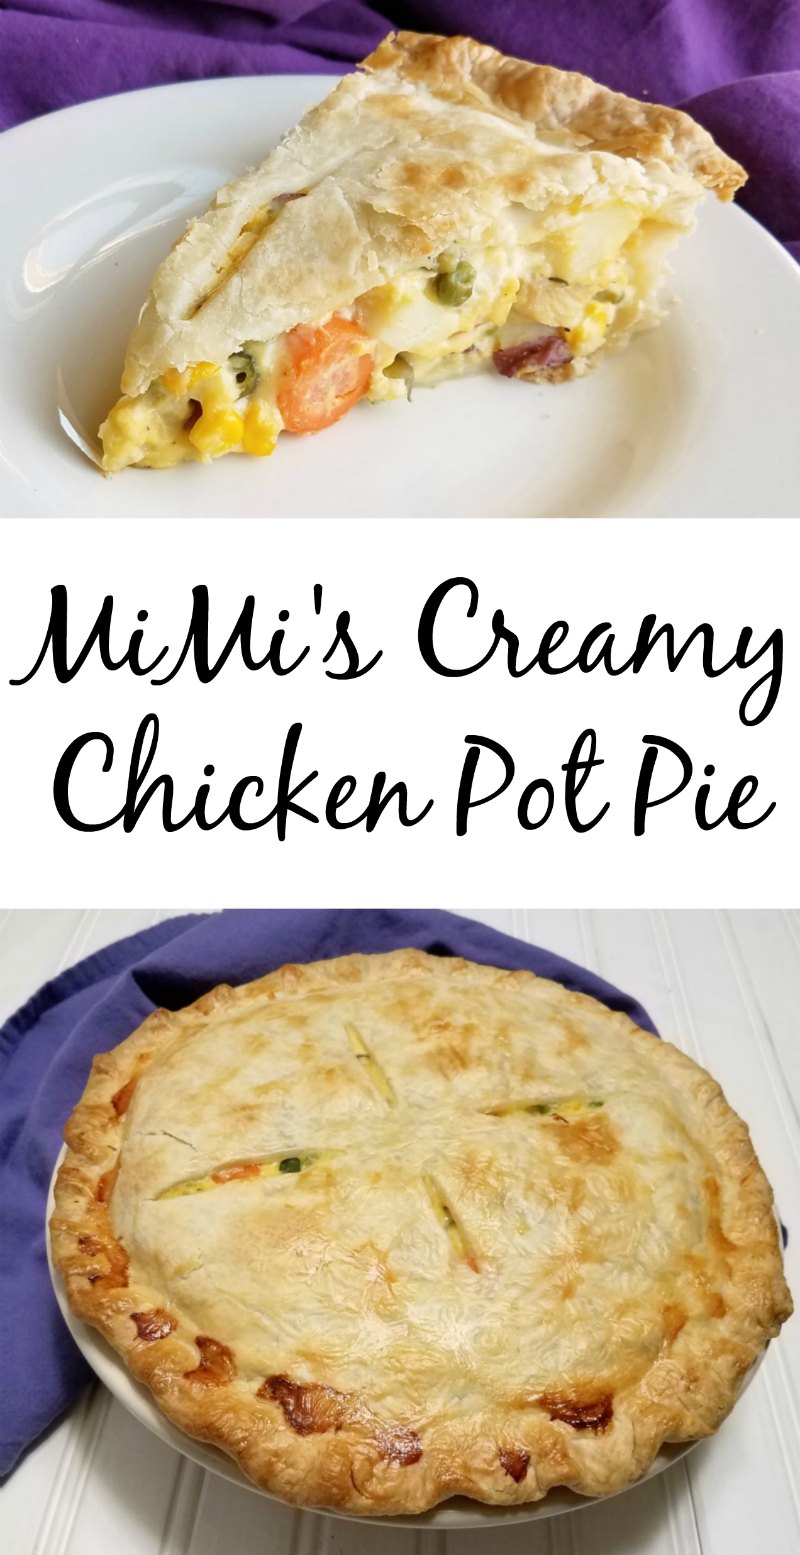 Cooking With Carlee: MiMi's Creamy Chicken Pot Pie